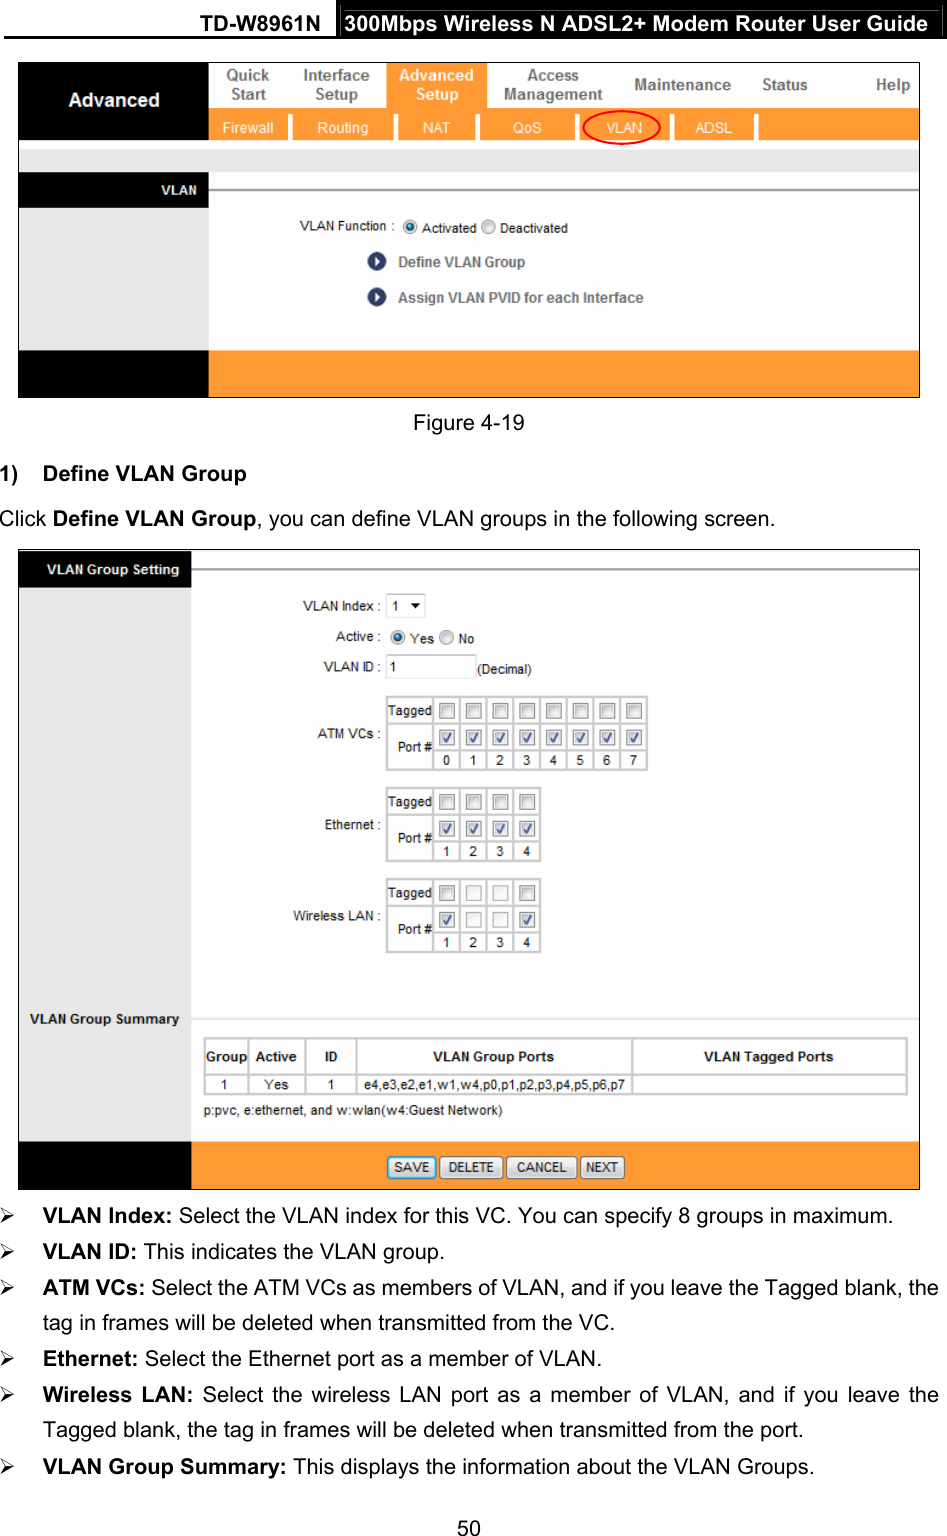 TD-W8961N  300Mbps Wireless N ADSL2+ Modem Router User Guide 50   Figure 4-19 1)  Define VLAN Group   Click Define VLAN Group, you can define VLAN groups in the following screen.   VLAN Index: Select the VLAN index for this VC. You can specify 8 groups in maximum.  VLAN ID: This indicates the VLAN group.  ATM VCs: Select the ATM VCs as members of VLAN, and if you leave the Tagged blank, the tag in frames will be deleted when transmitted from the VC.  Ethernet: Select the Ethernet port as a member of VLAN.  Wireless LAN: Select the wireless LAN port as a member of VLAN, and if you leave the Tagged blank, the tag in frames will be deleted when transmitted from the port.  VLAN Group Summary: This displays the information about the VLAN Groups. 